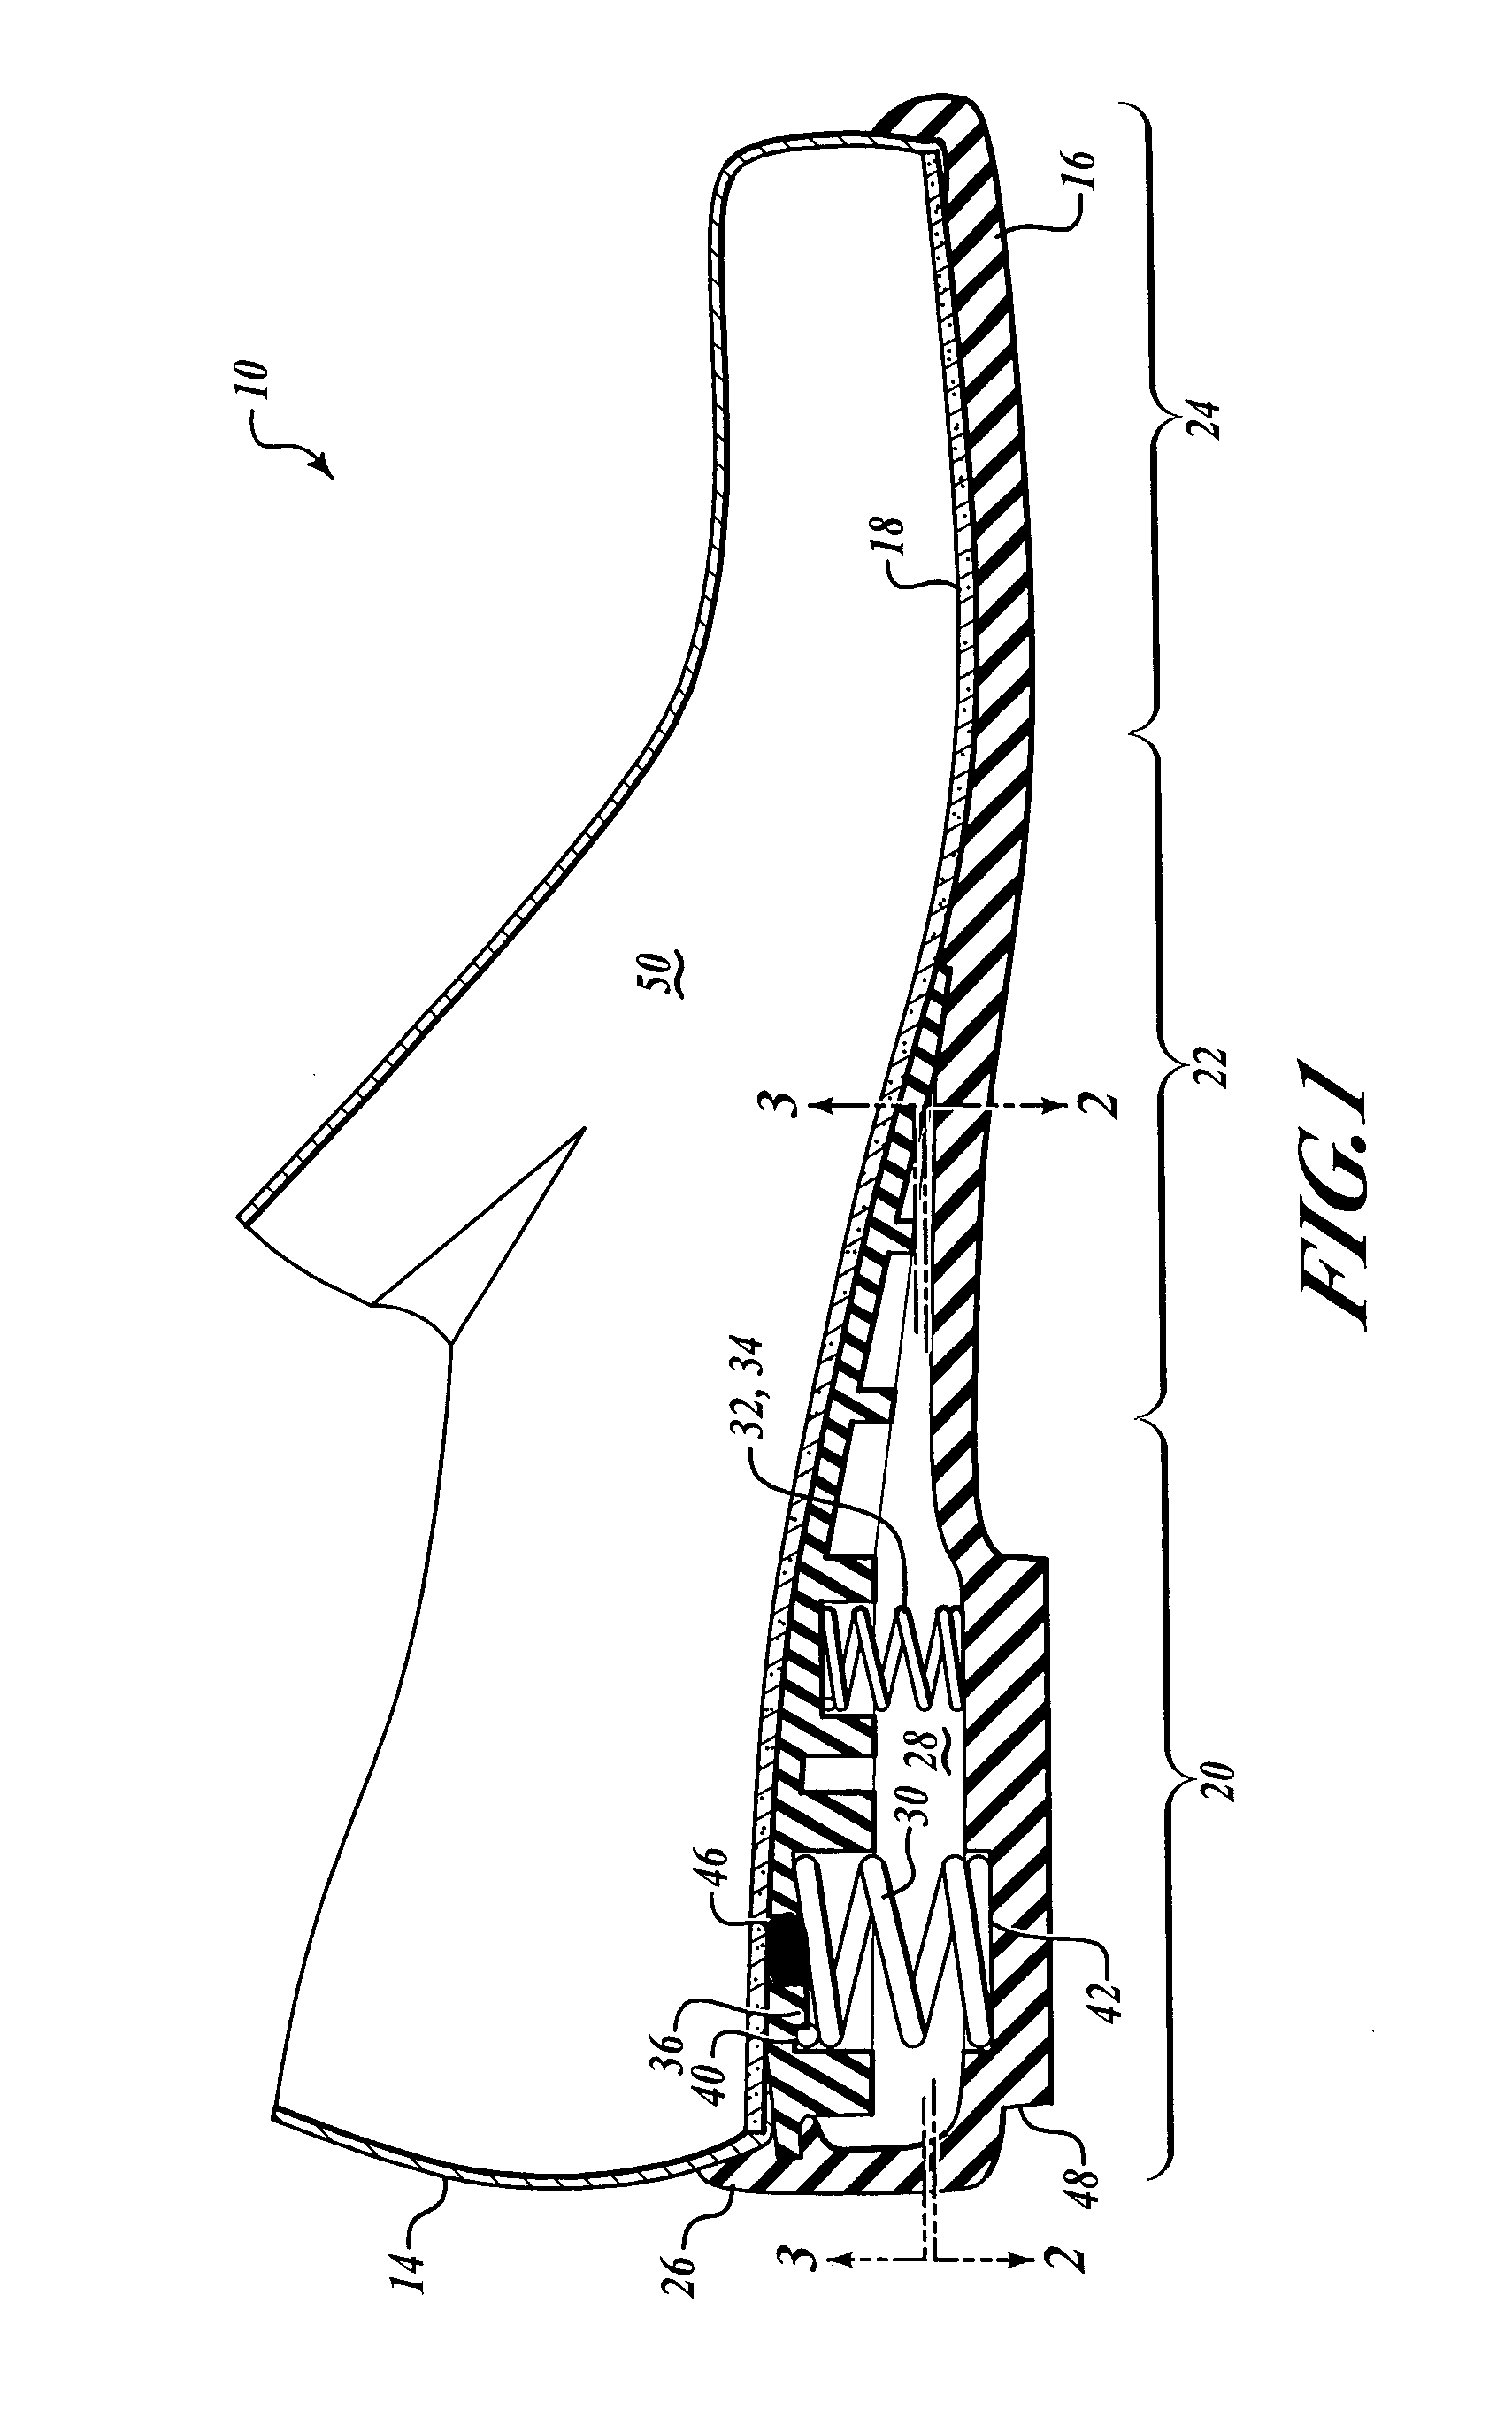 Ventilated and resilient shoe apparatus and system